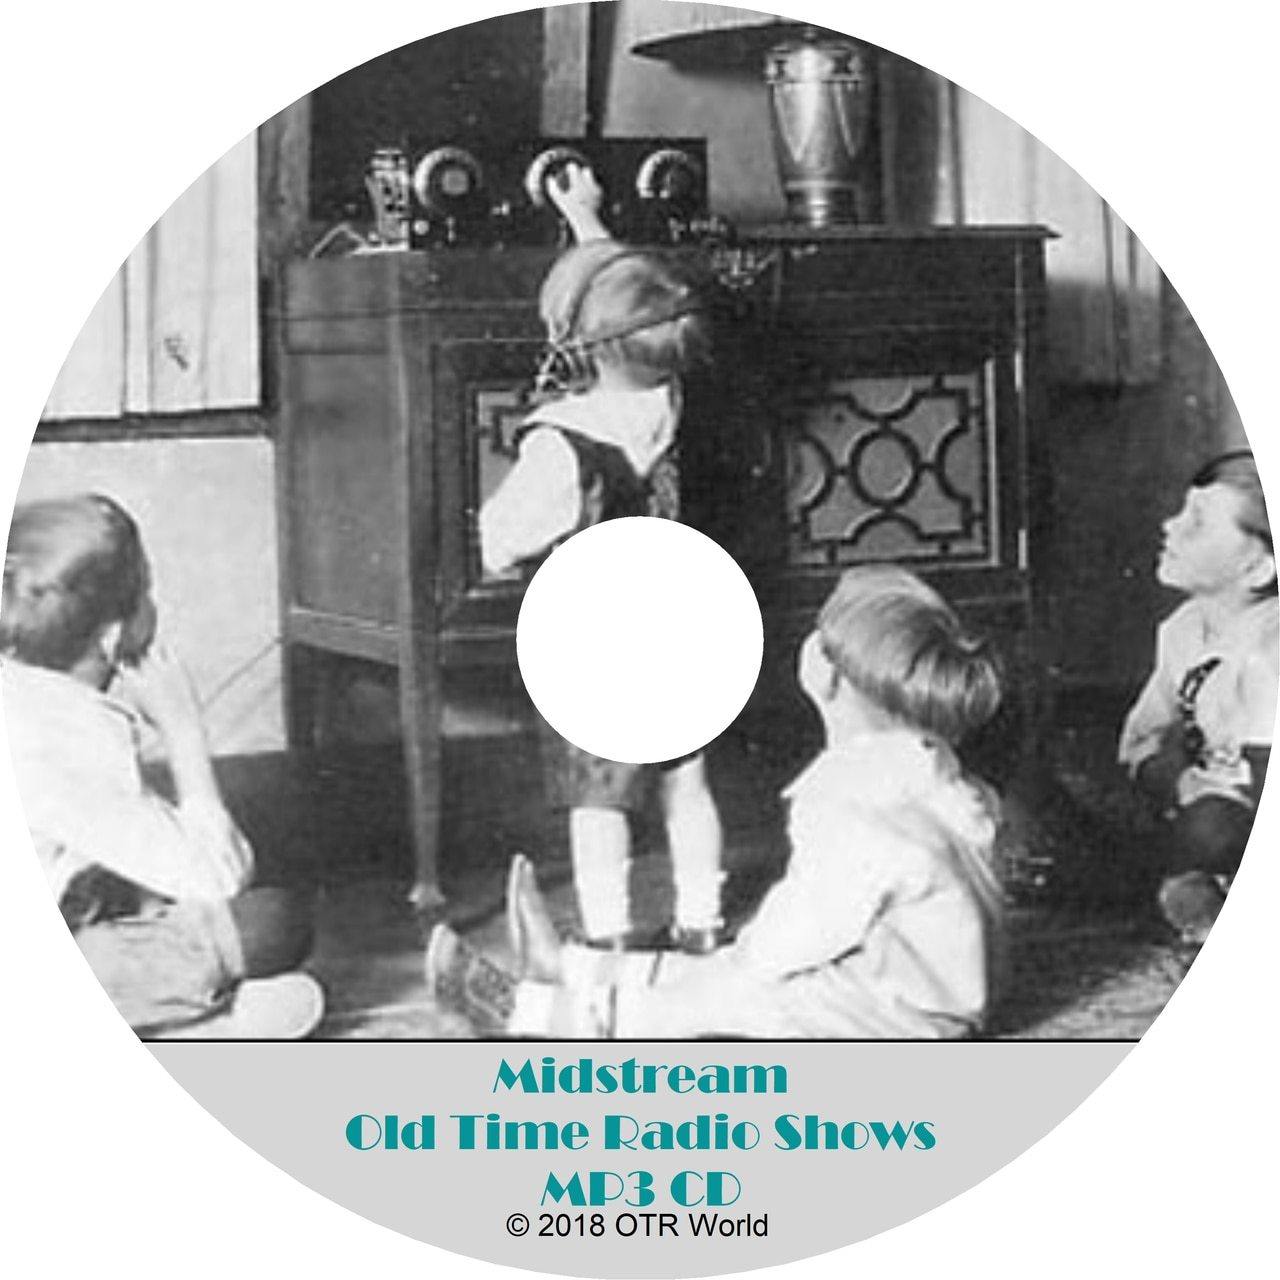 Midstream Old Time Radio Shows 2 Episodes On MP3 CD - OTR World